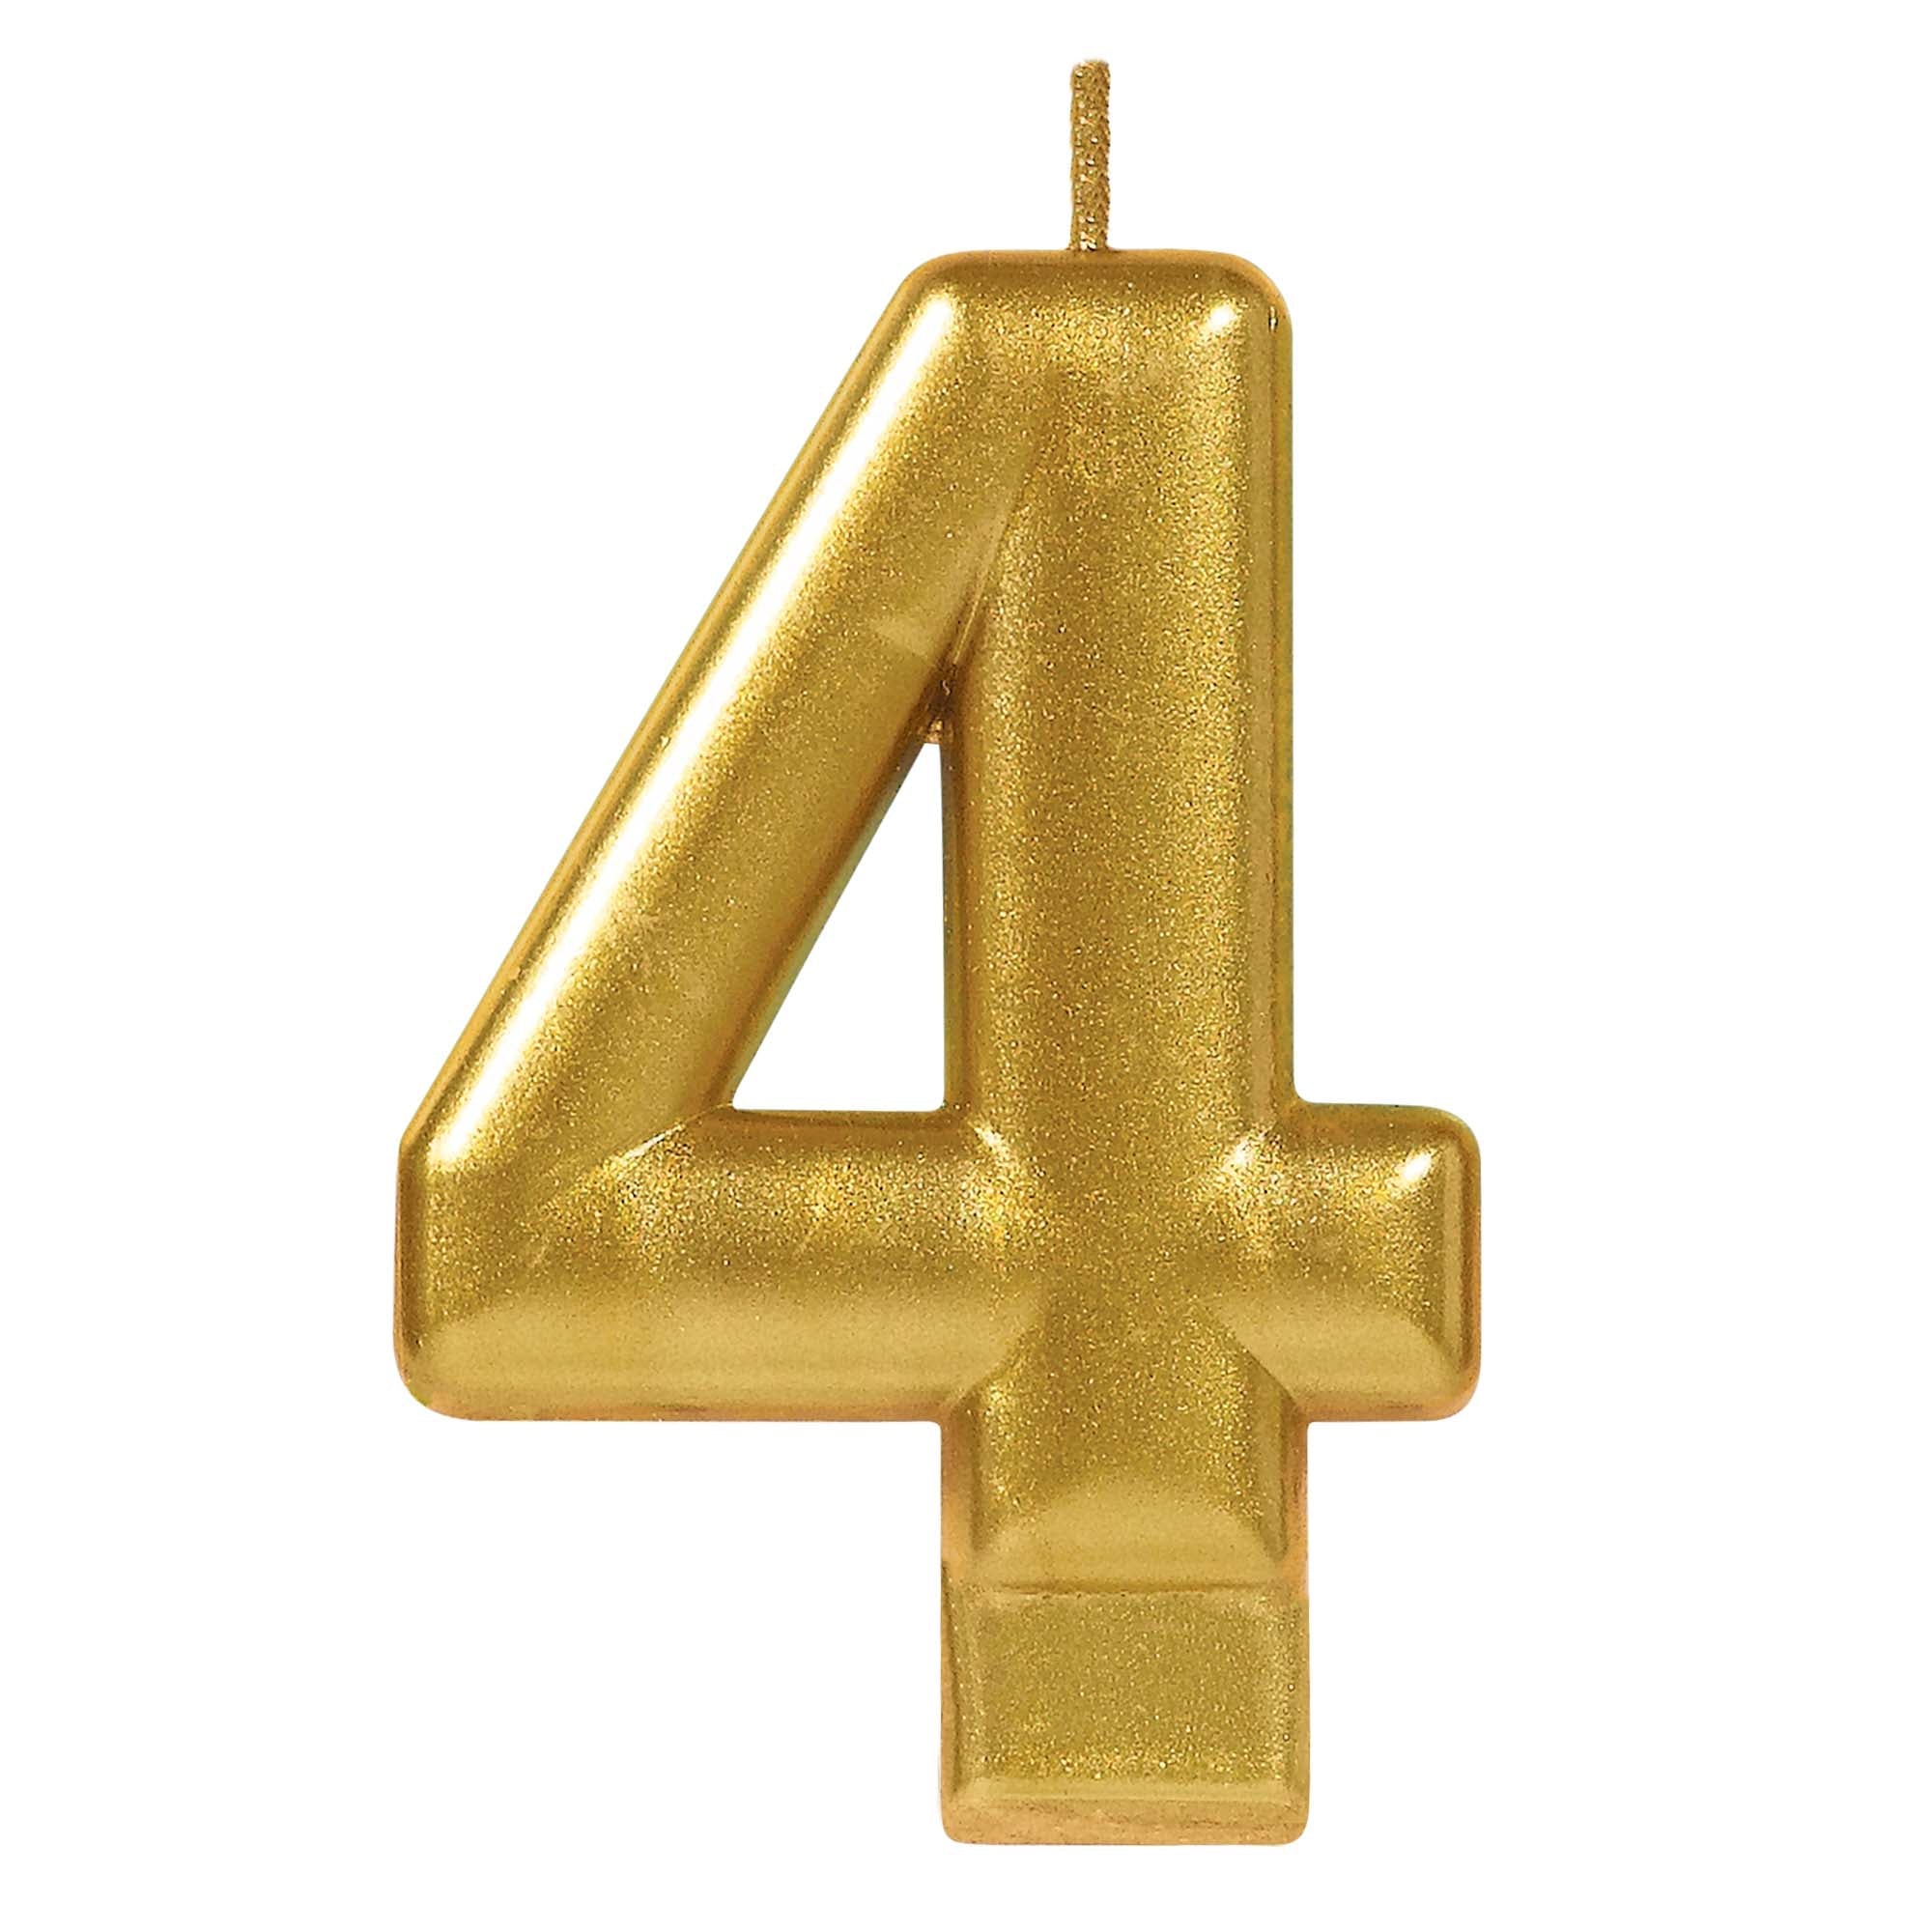 Numeral Candle 4 Gold Metallic  3.25in